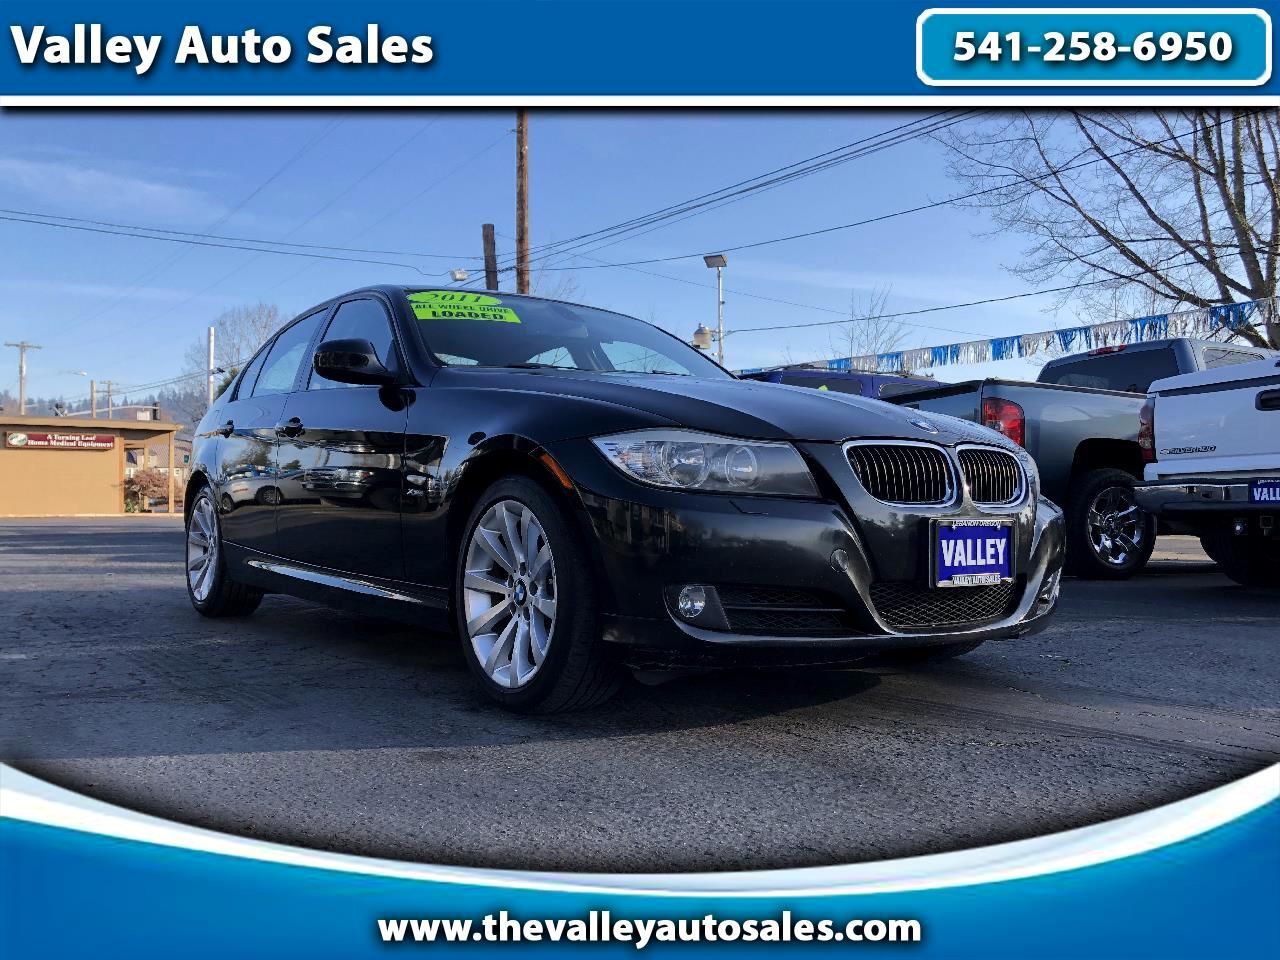 Used 2011 Bmw 3 Series 328i Xdrive For Sale In Lebanon Or